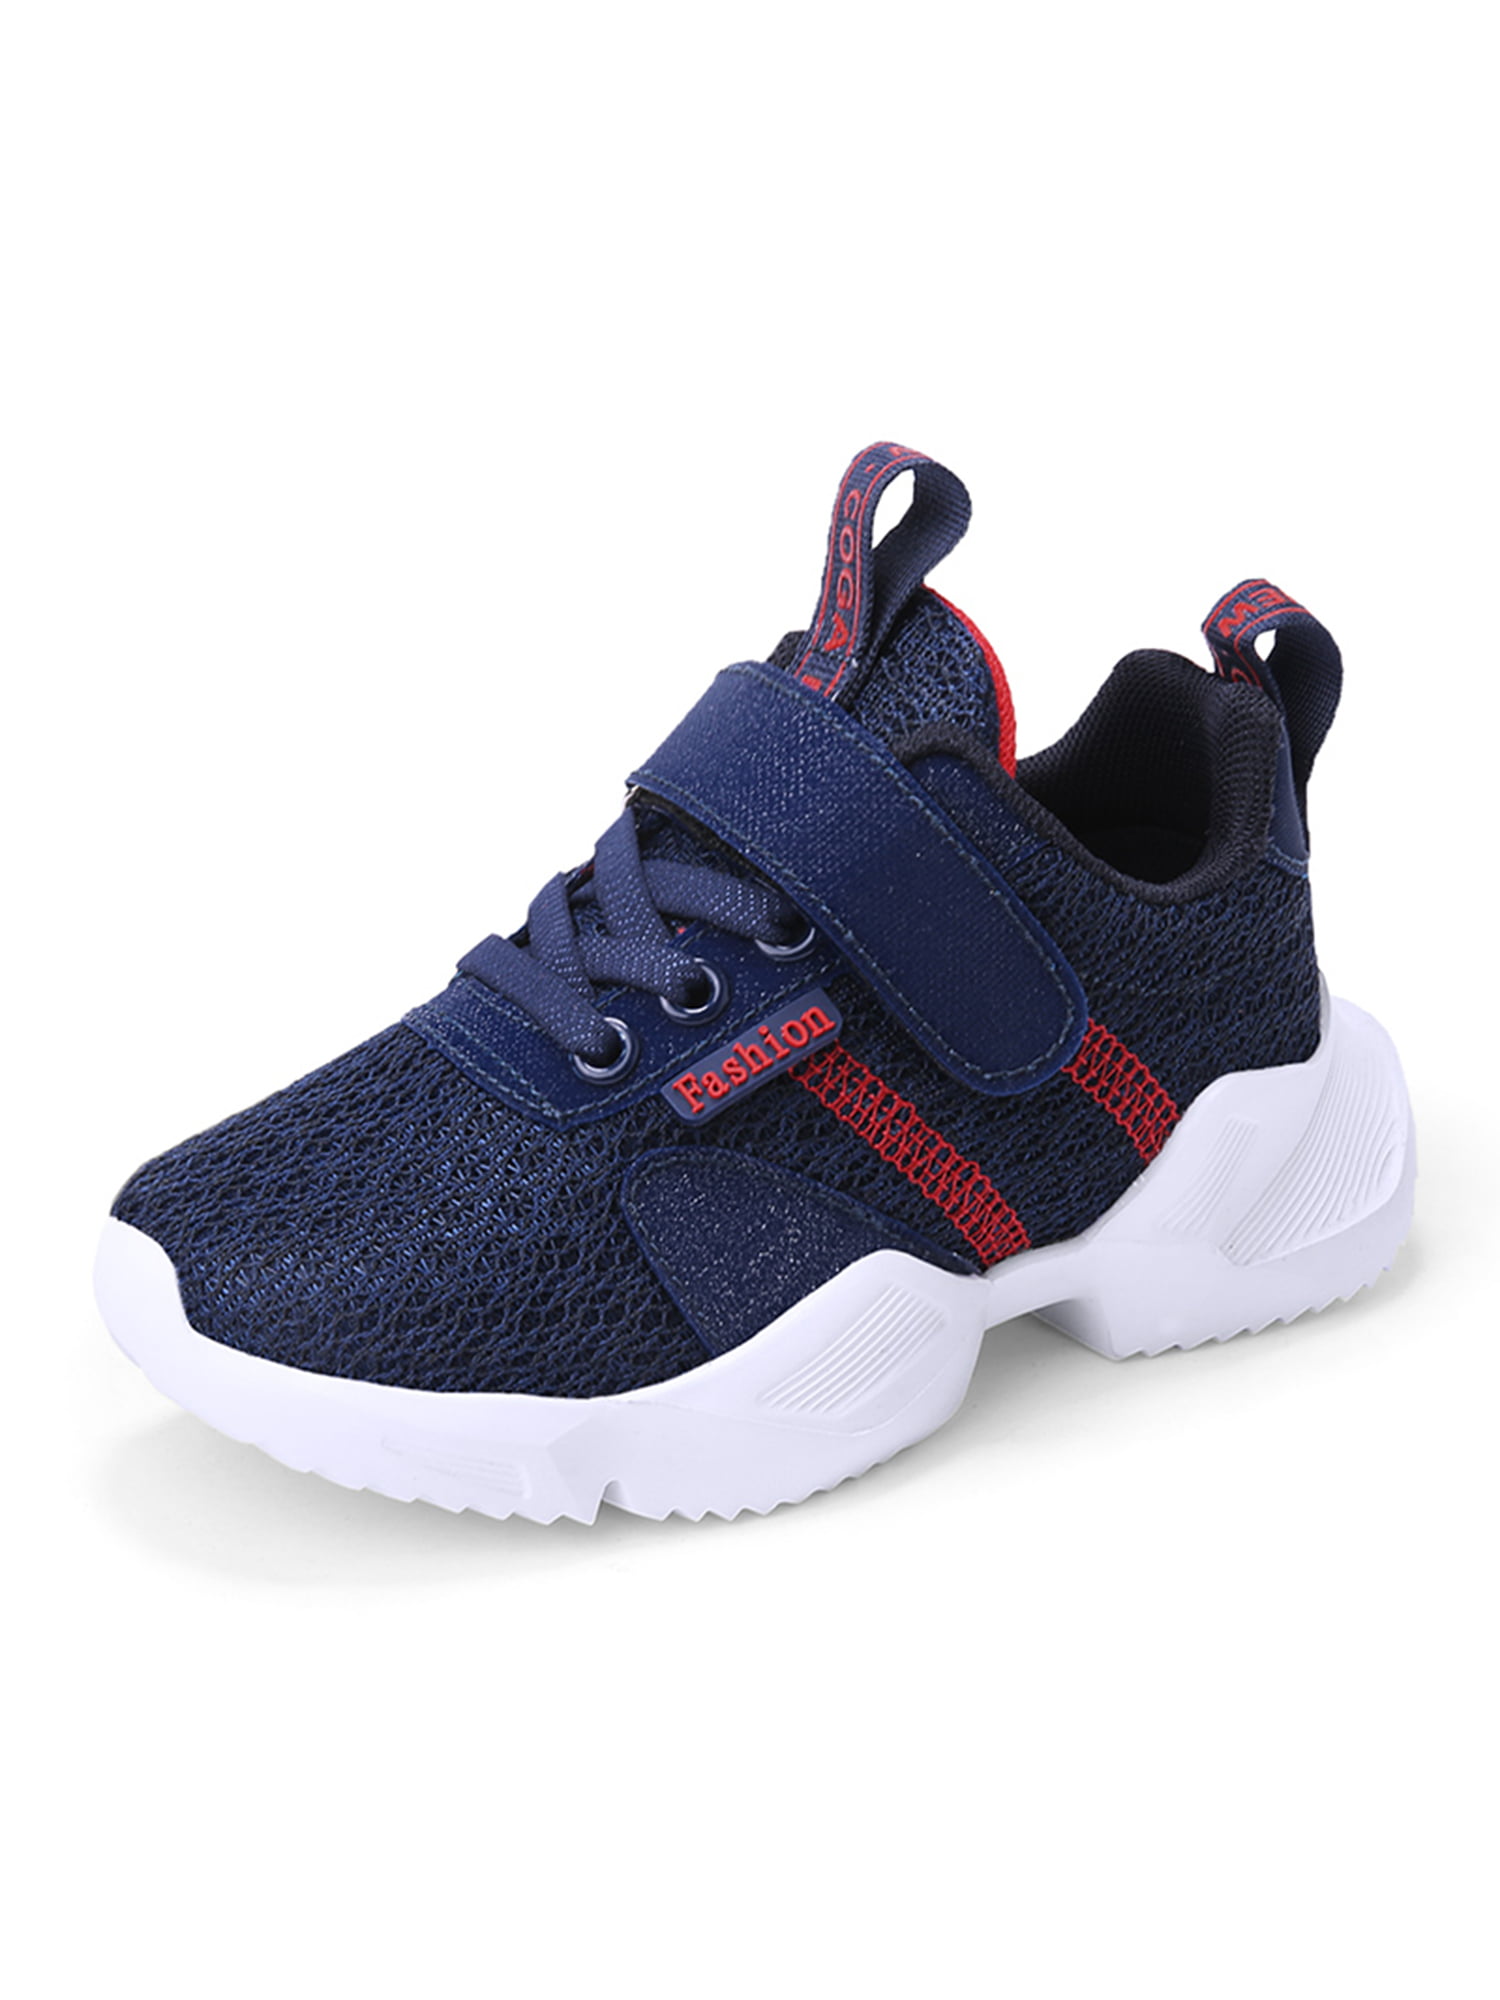 Rose town Kids Tennis Shoes Breathable Athletic Shoes Walking Running Shoes Fashion Sneakers for Boys Girls 